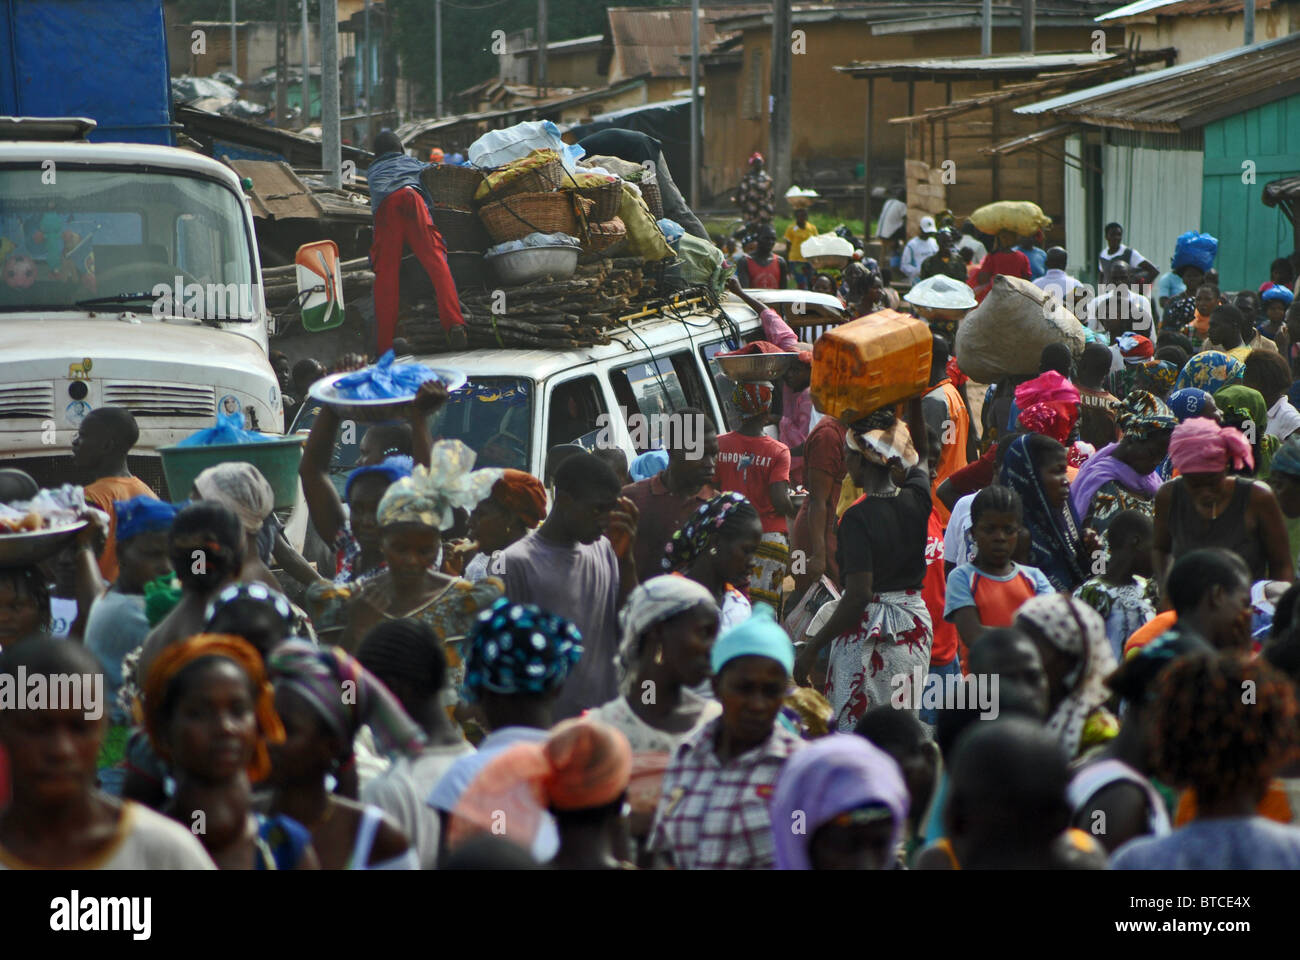 Crowds of people and vehicles on a road in Man, Ivory Coast, West Africa Stock Photo